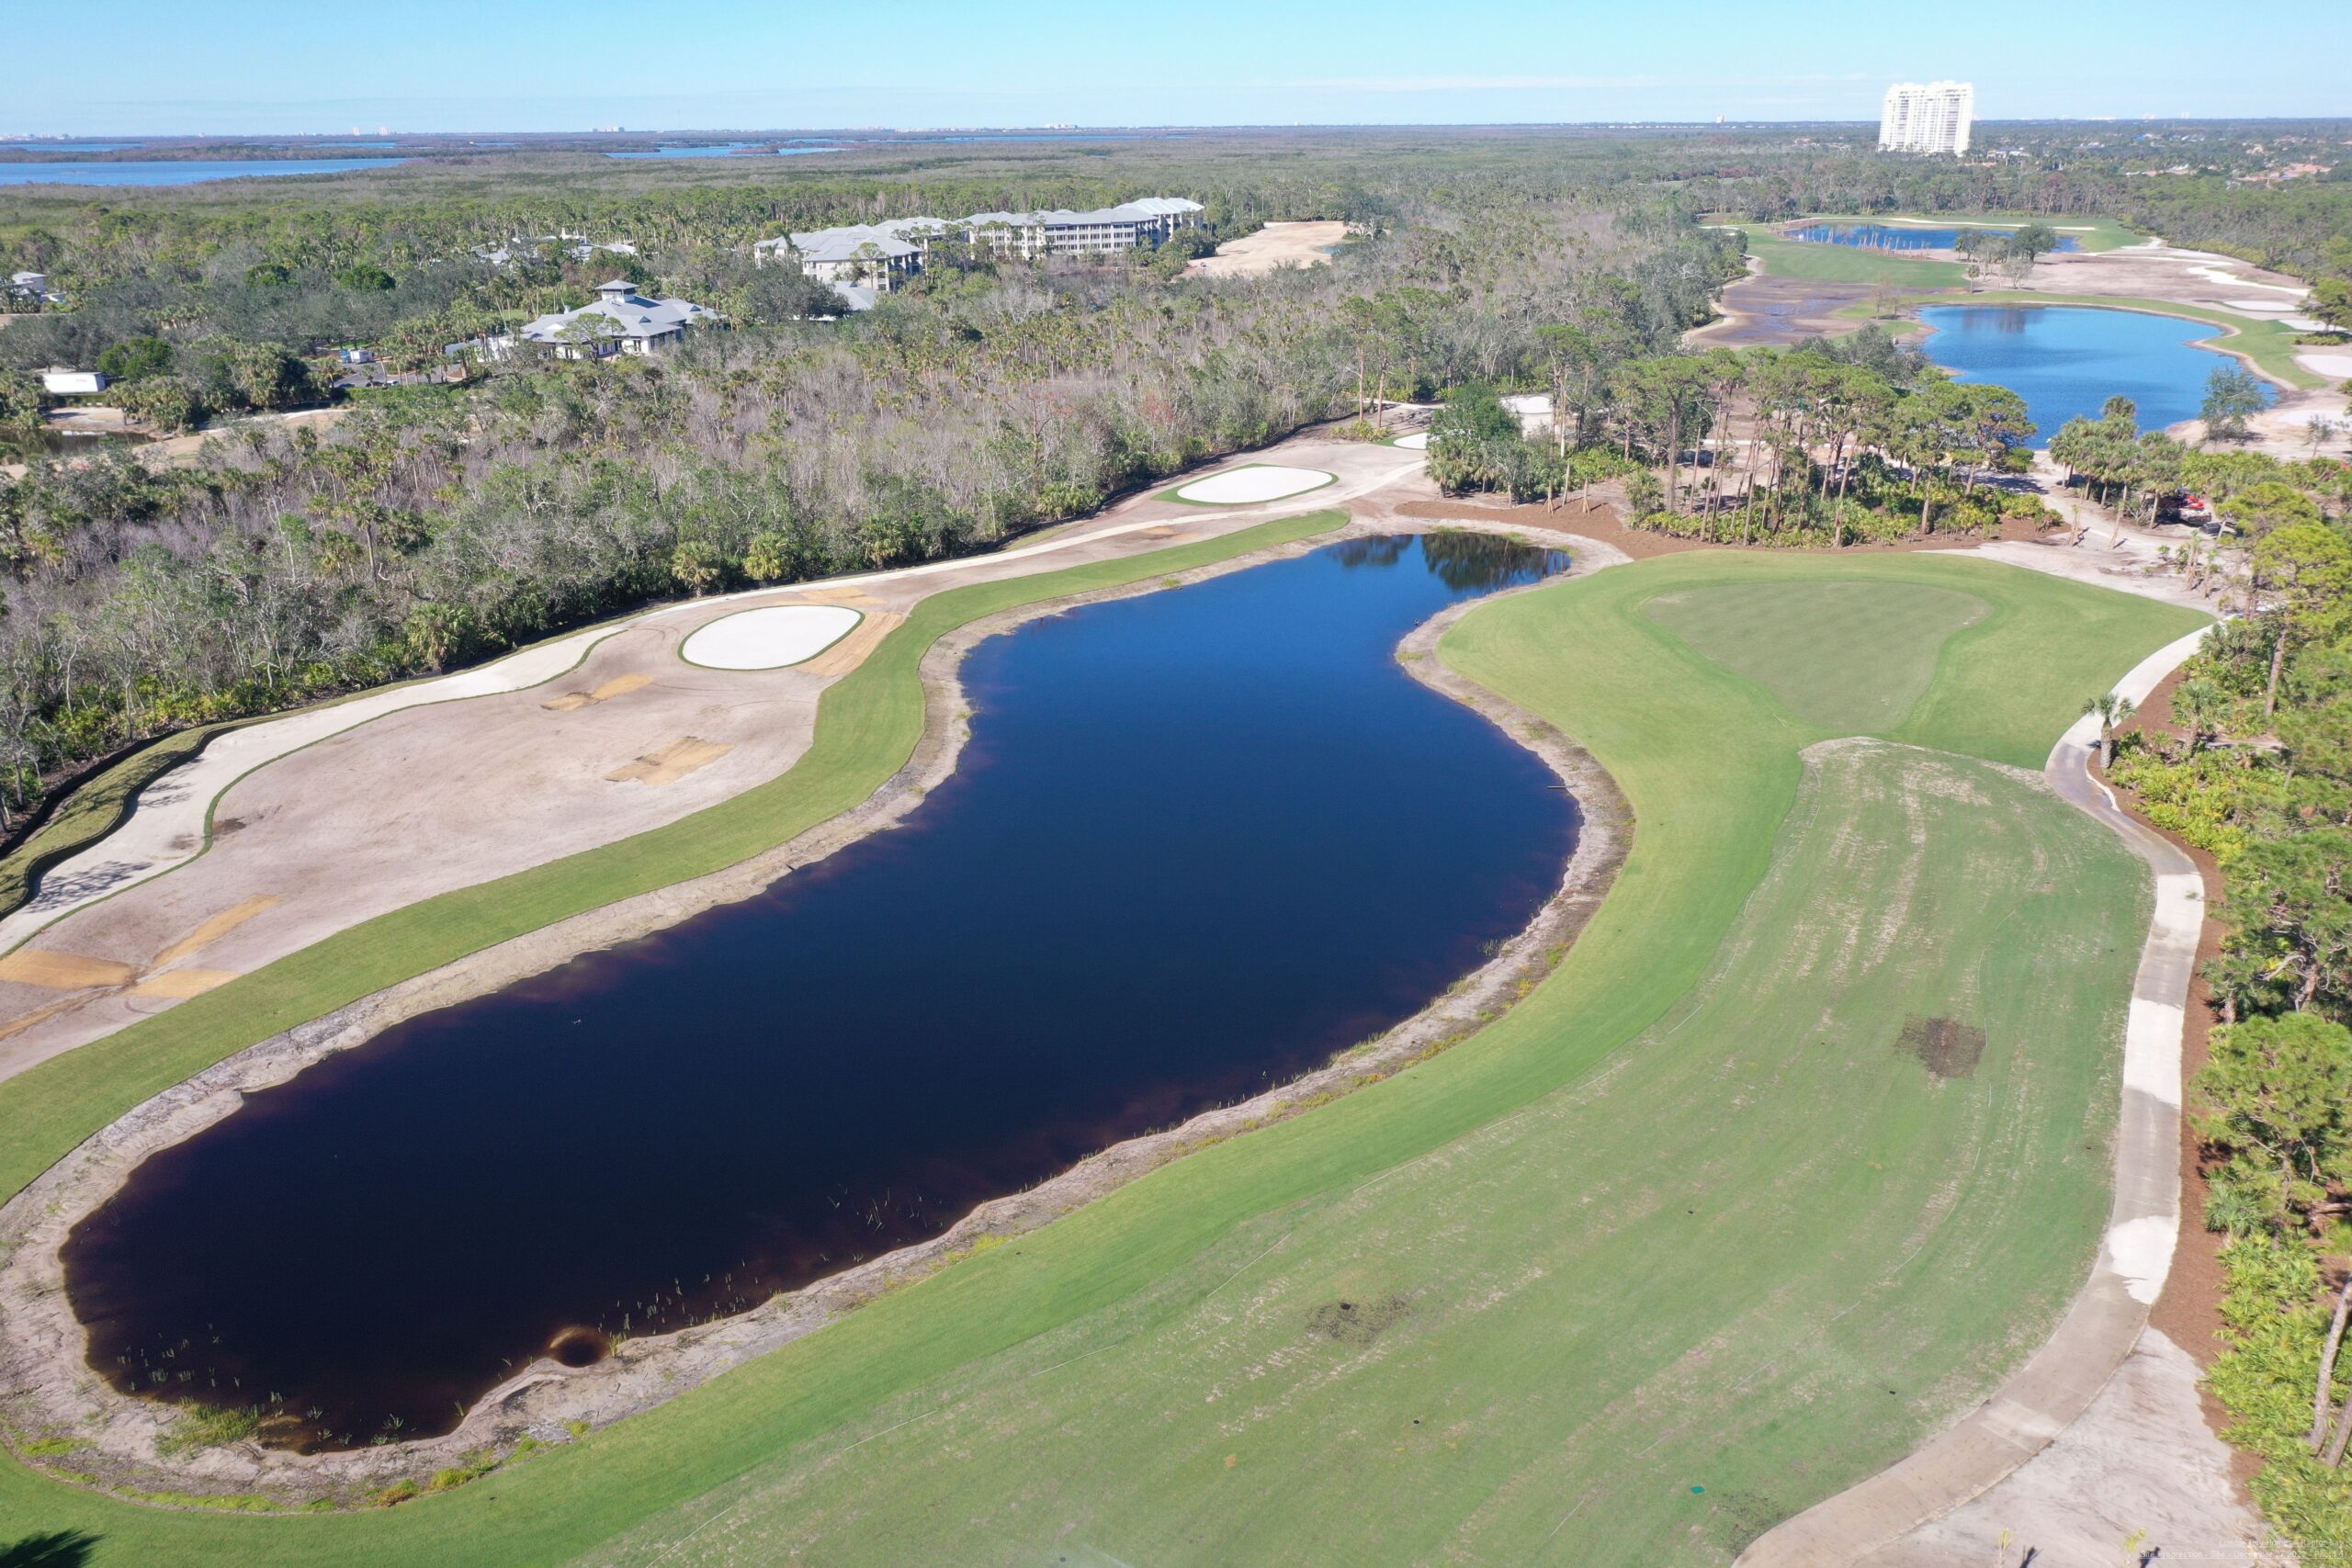 An aerial view of the championship golf course at Saltleaf Golf Preserve in Bonita Springs, with a pond.